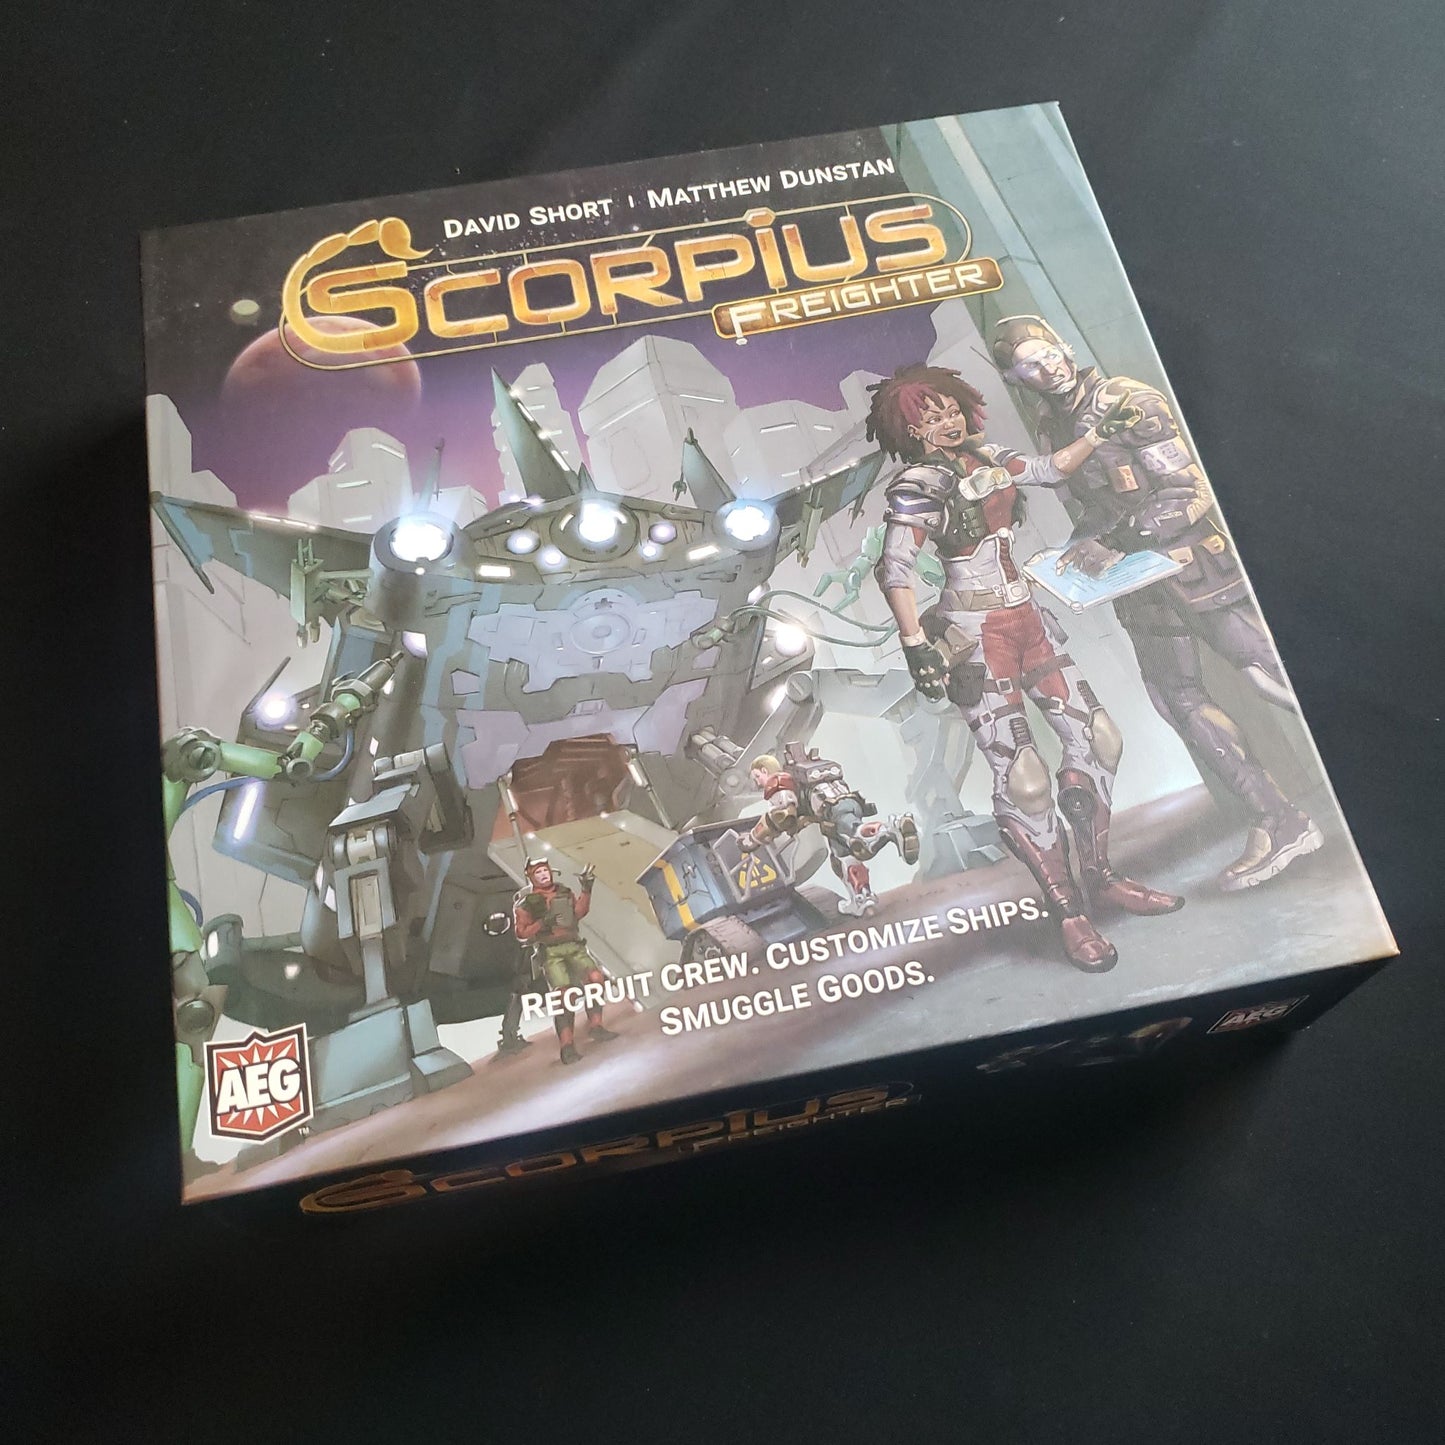 Image shows the front cover of the box of the Scorpius freighter board game